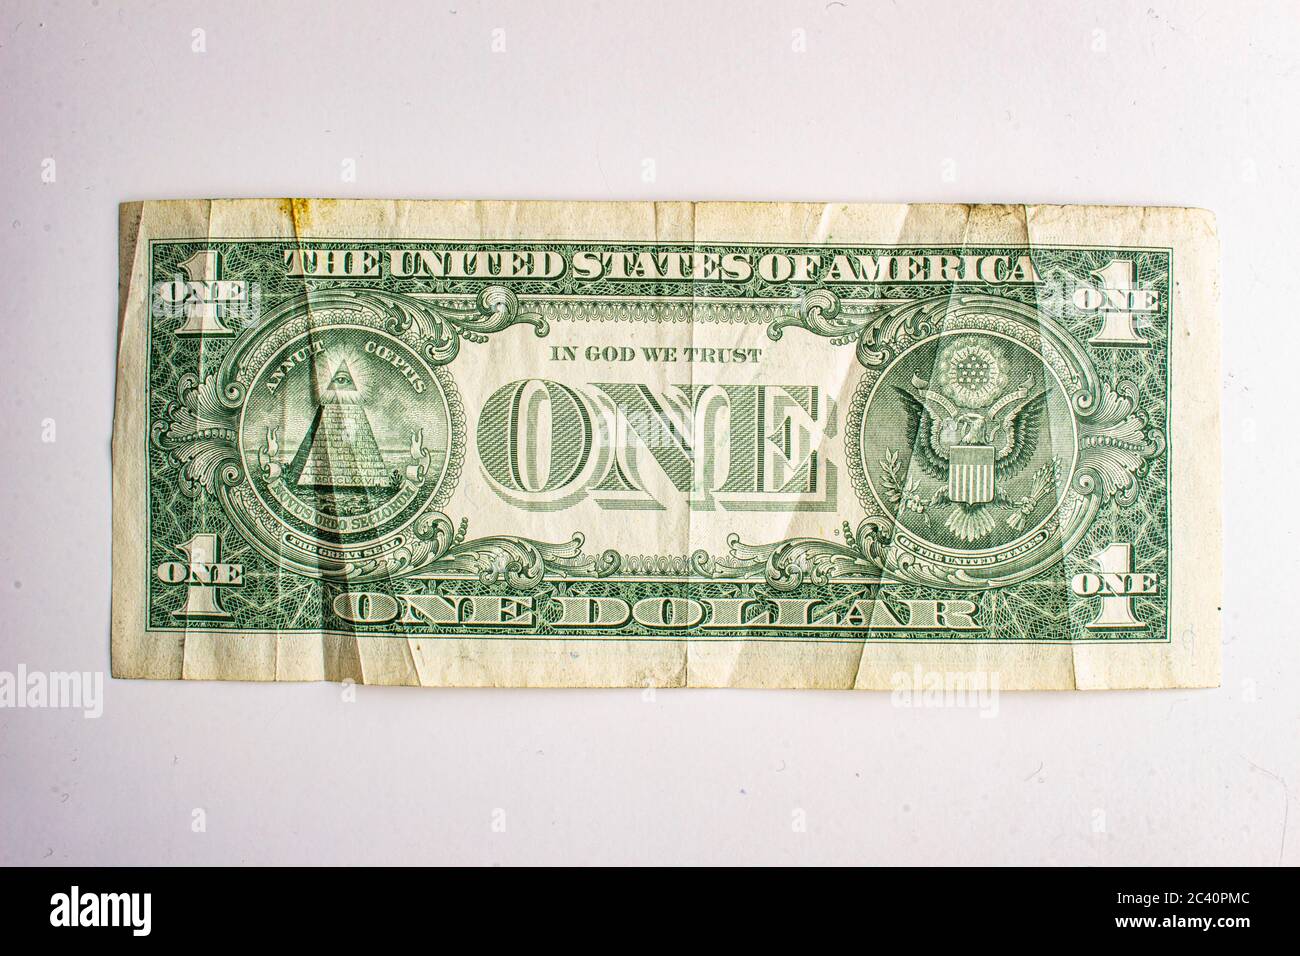 San Francisco, California, USA. June 22, 2020. An Old Back of the American One Dollar Bill Stock Photo